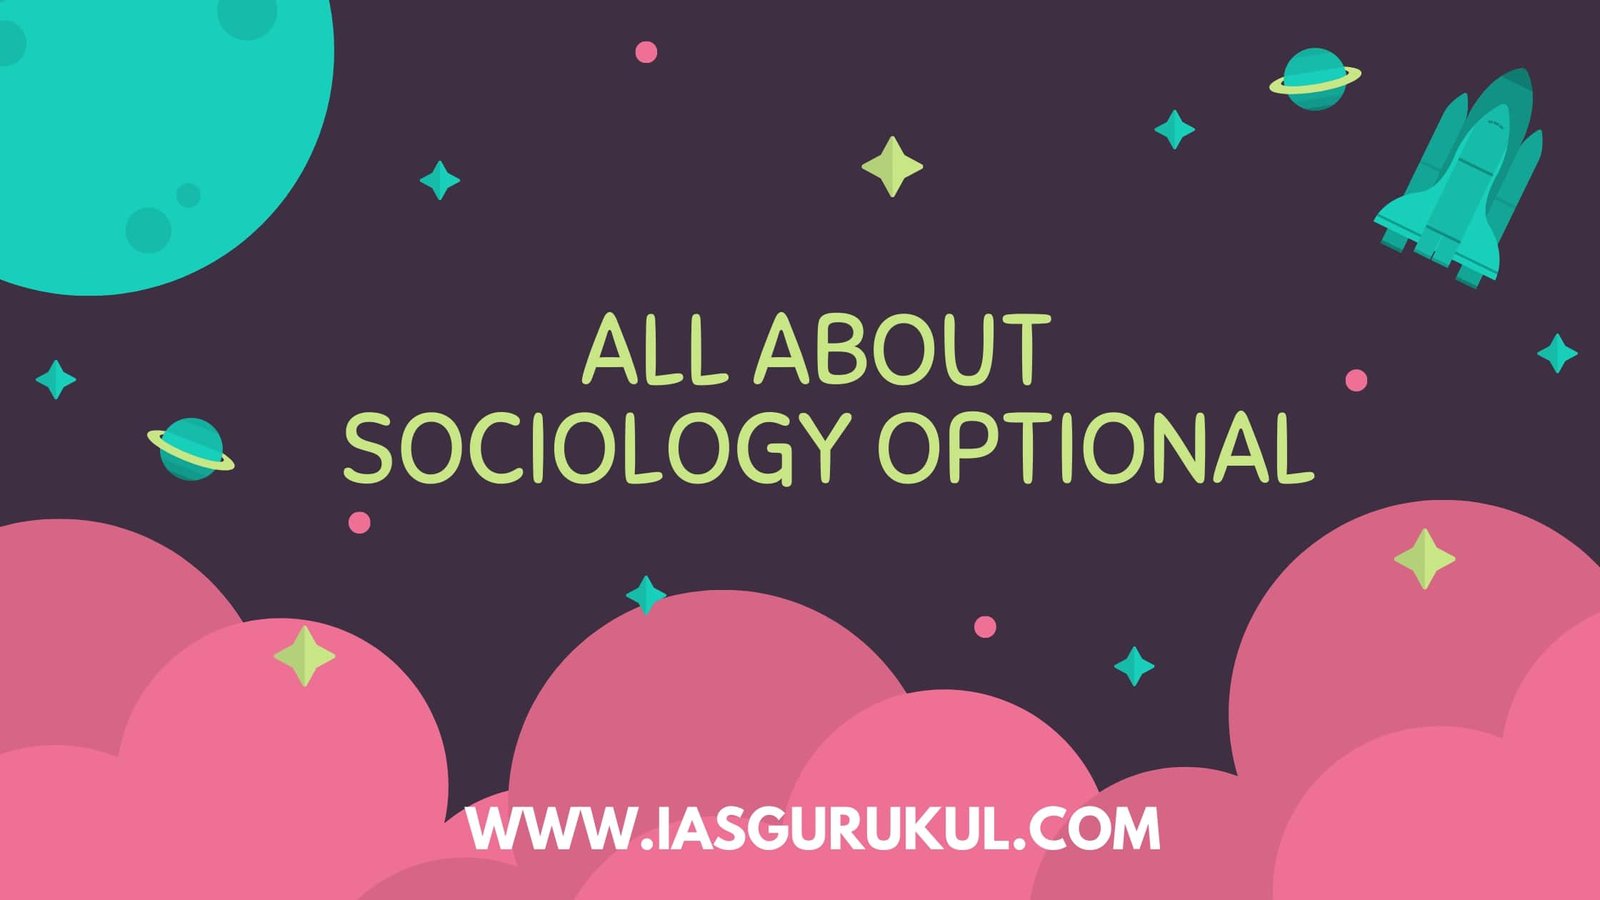 All About Sociology Optional